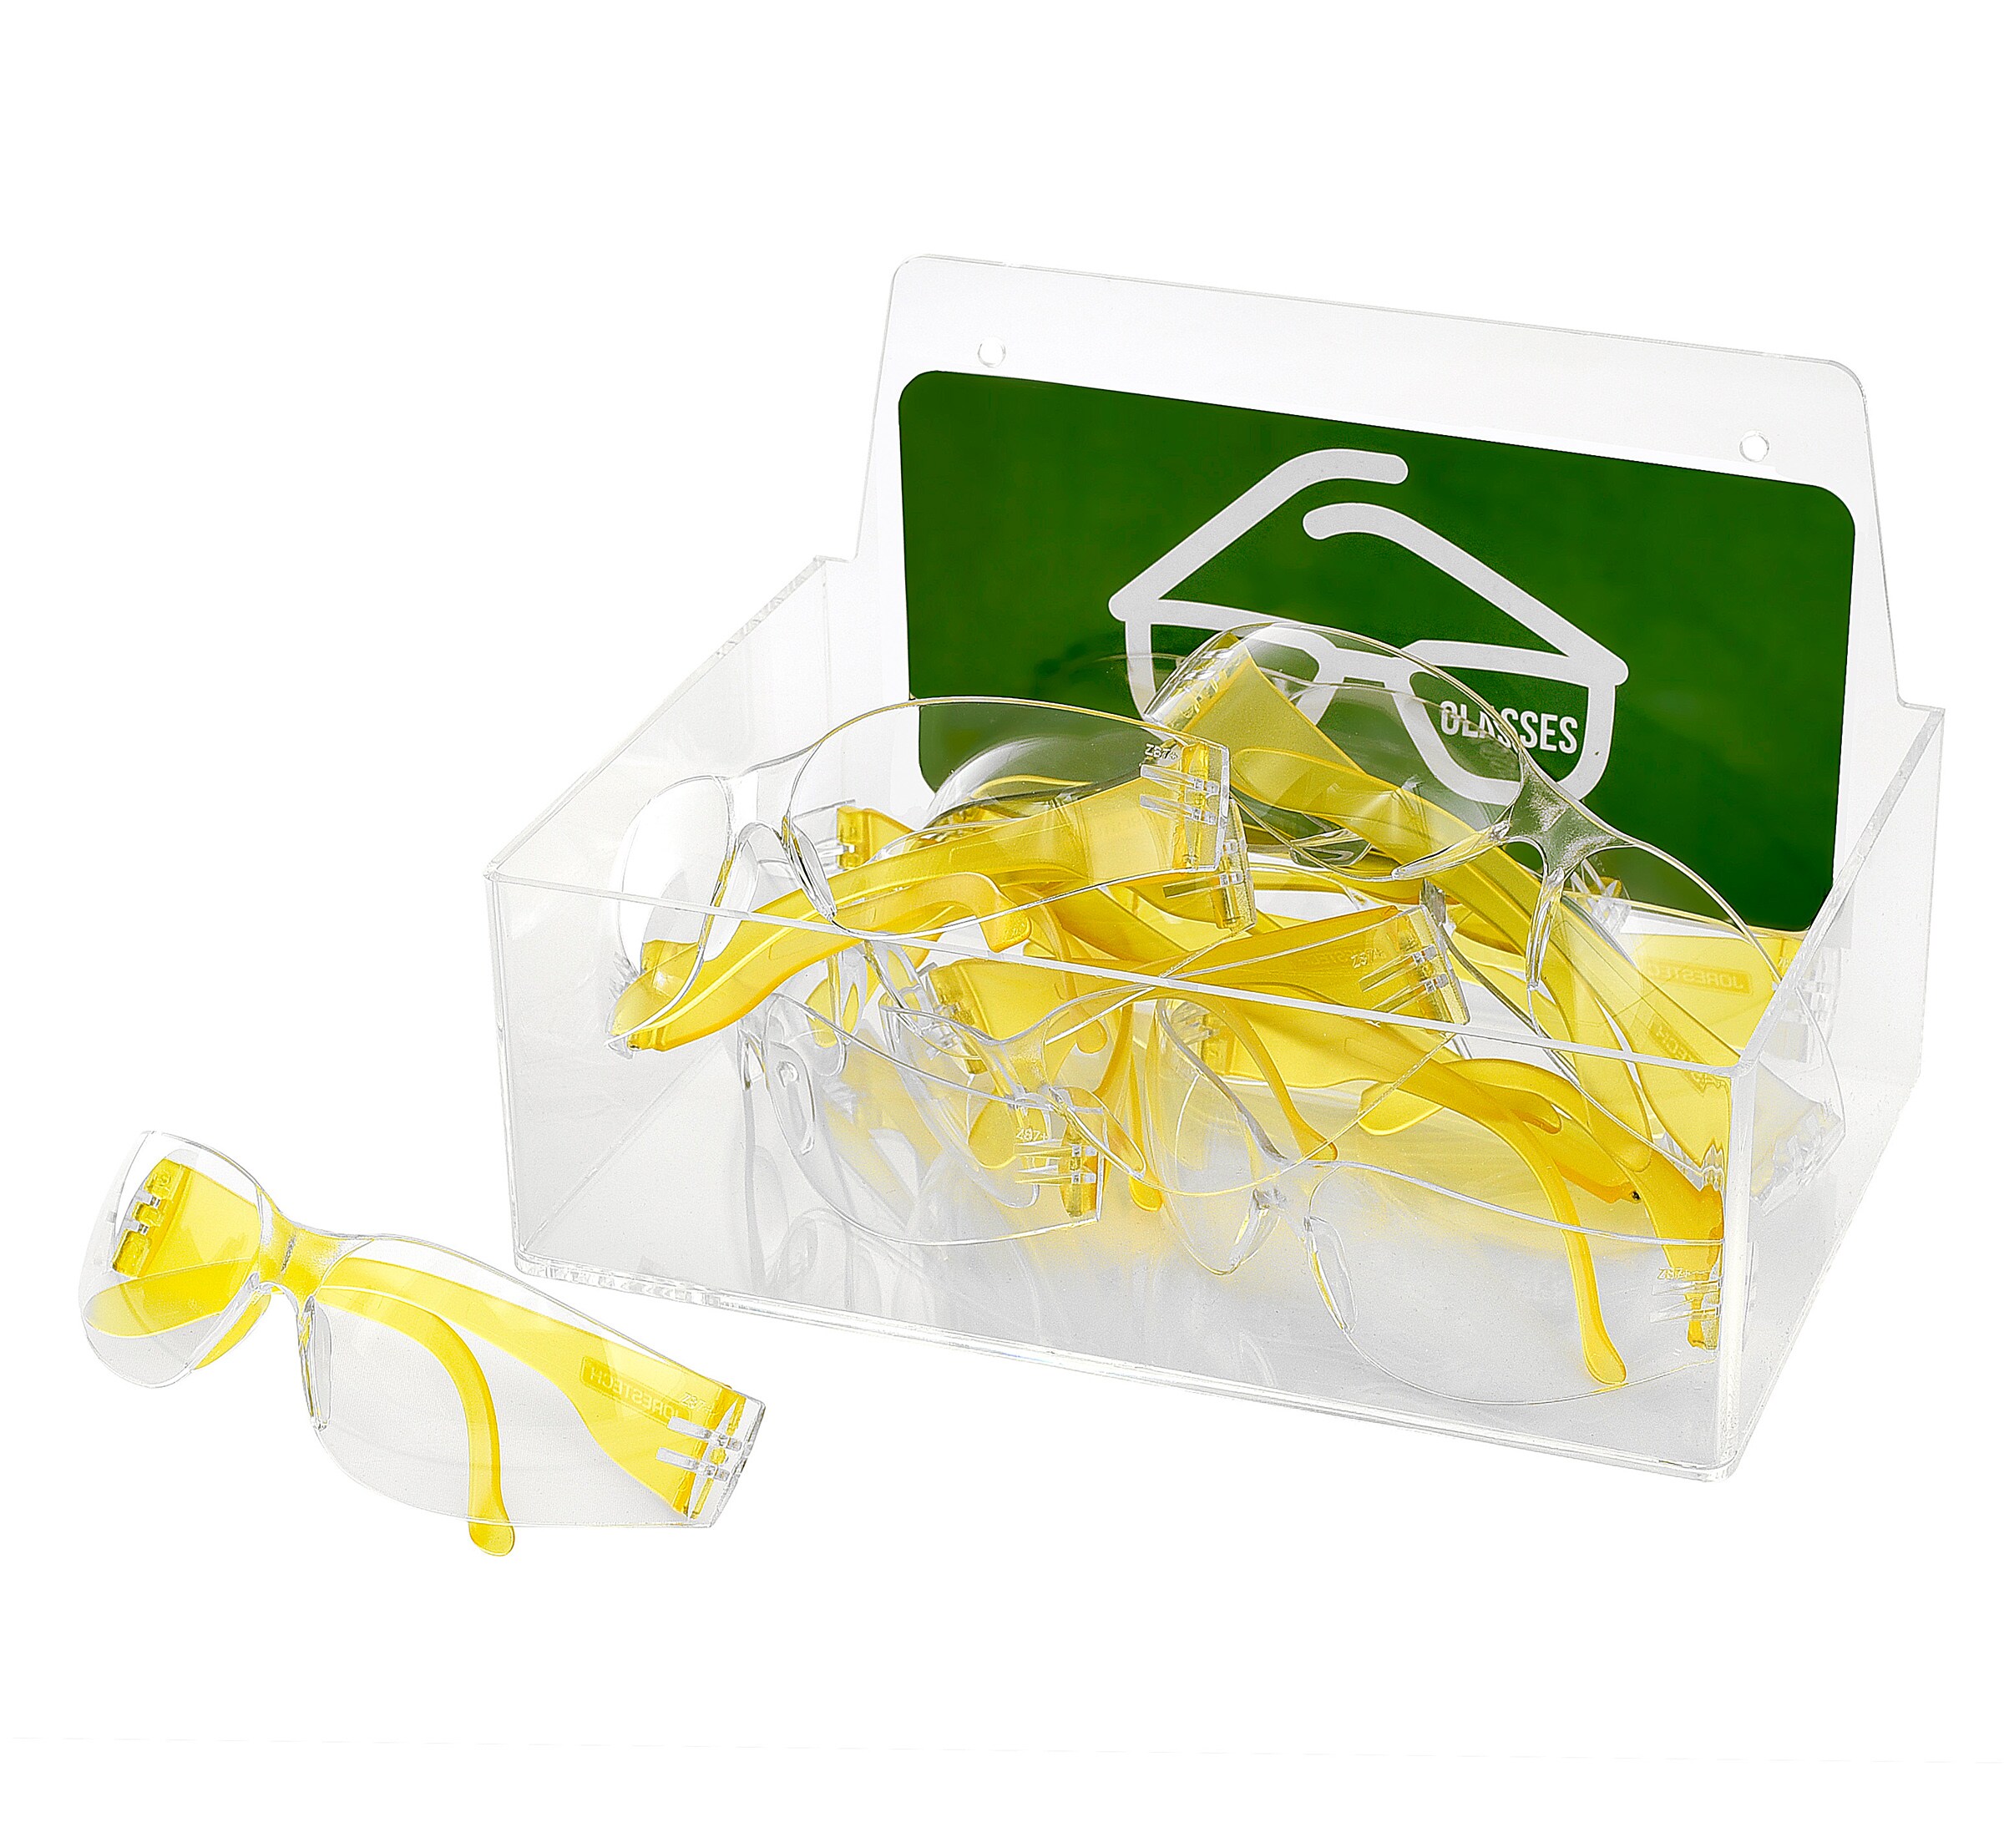 6 Depth LegendSafety Glasses Green Text on Clear Plastic Brady Safety Glasses Holder 3 Height 45234 Twо Расk 9 Width 